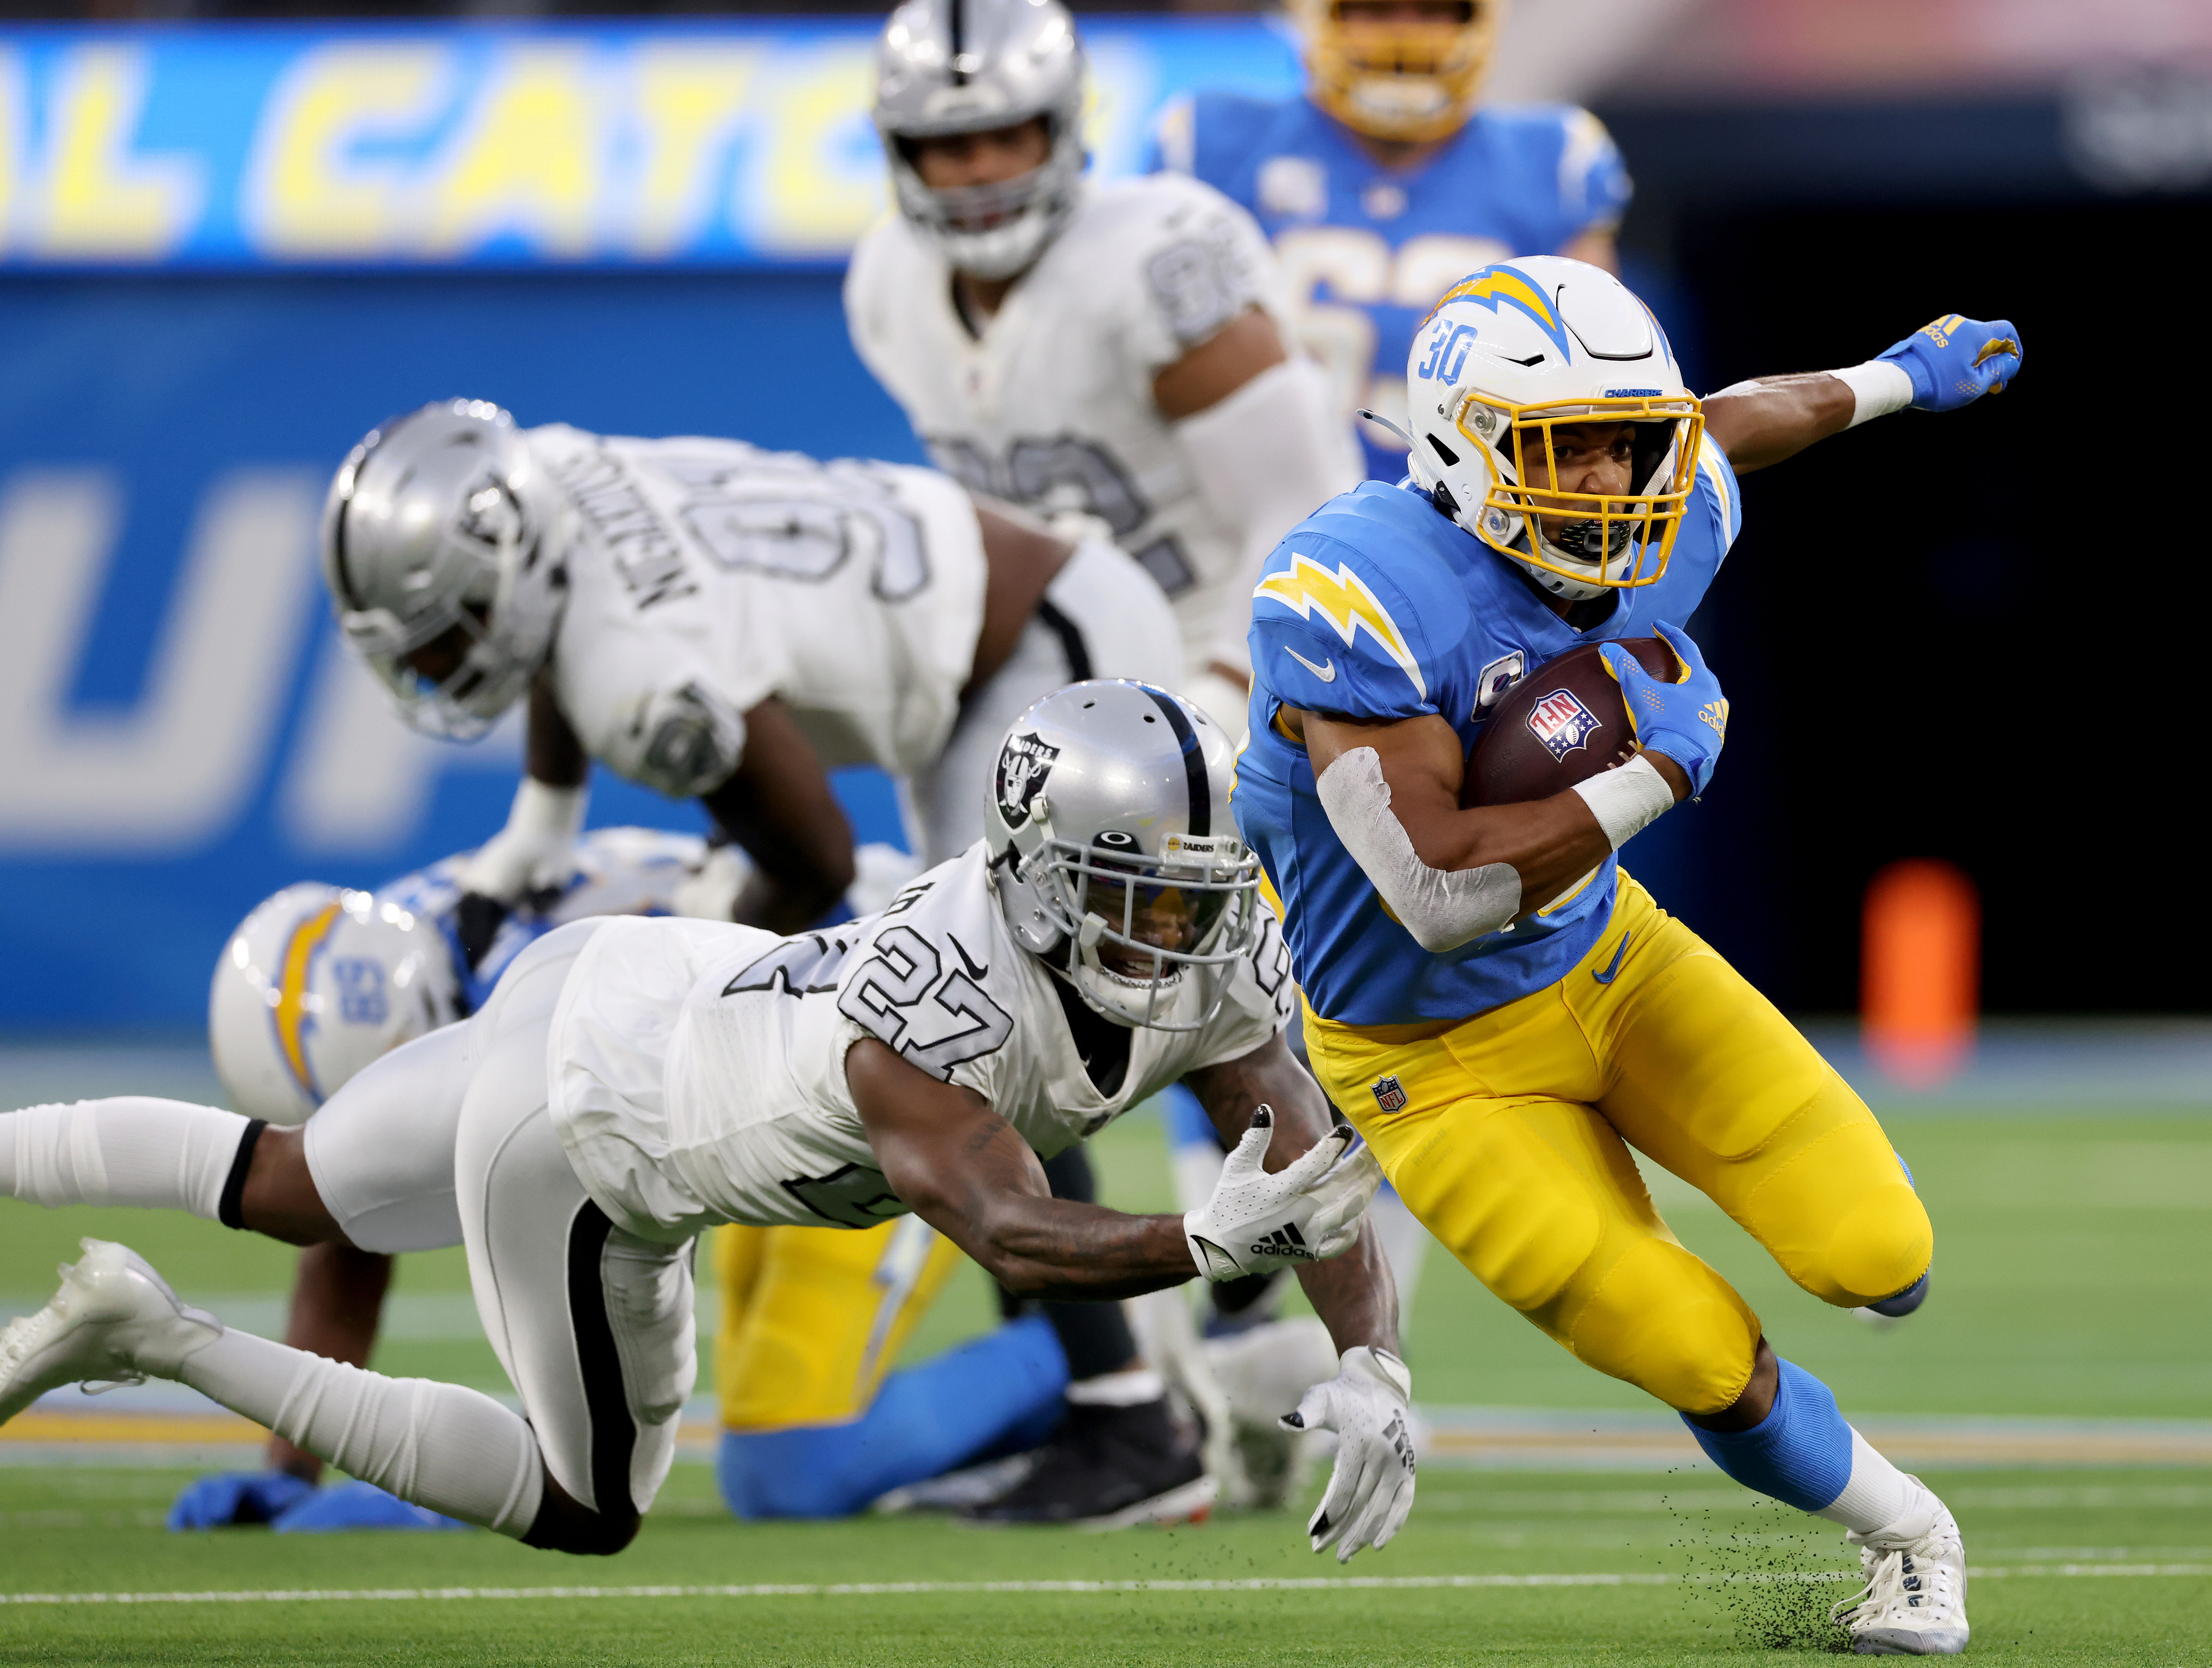 The Raiders and Chargers face off Sunday night to decide the final AFC playoff spot